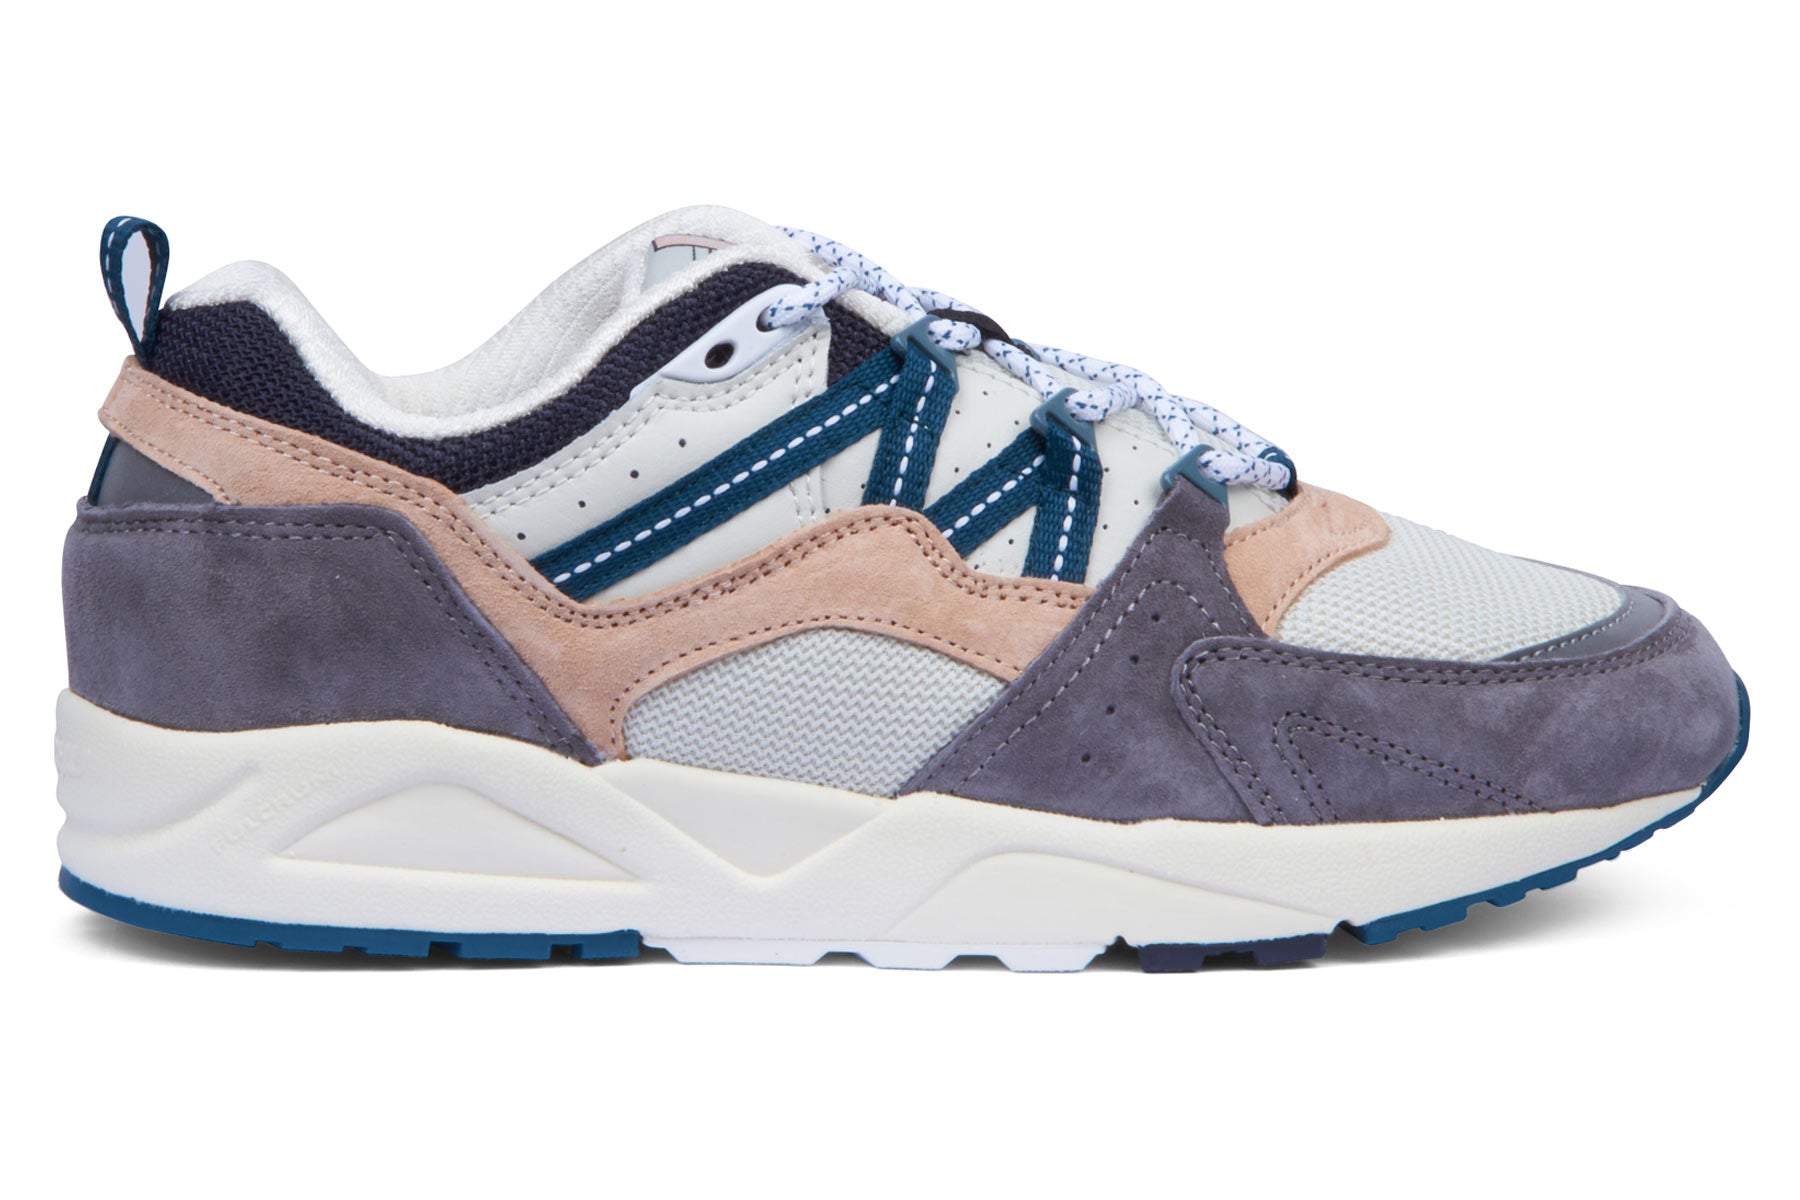 Karhu Fusion 2.0 - Frost Gray/Blue Coral